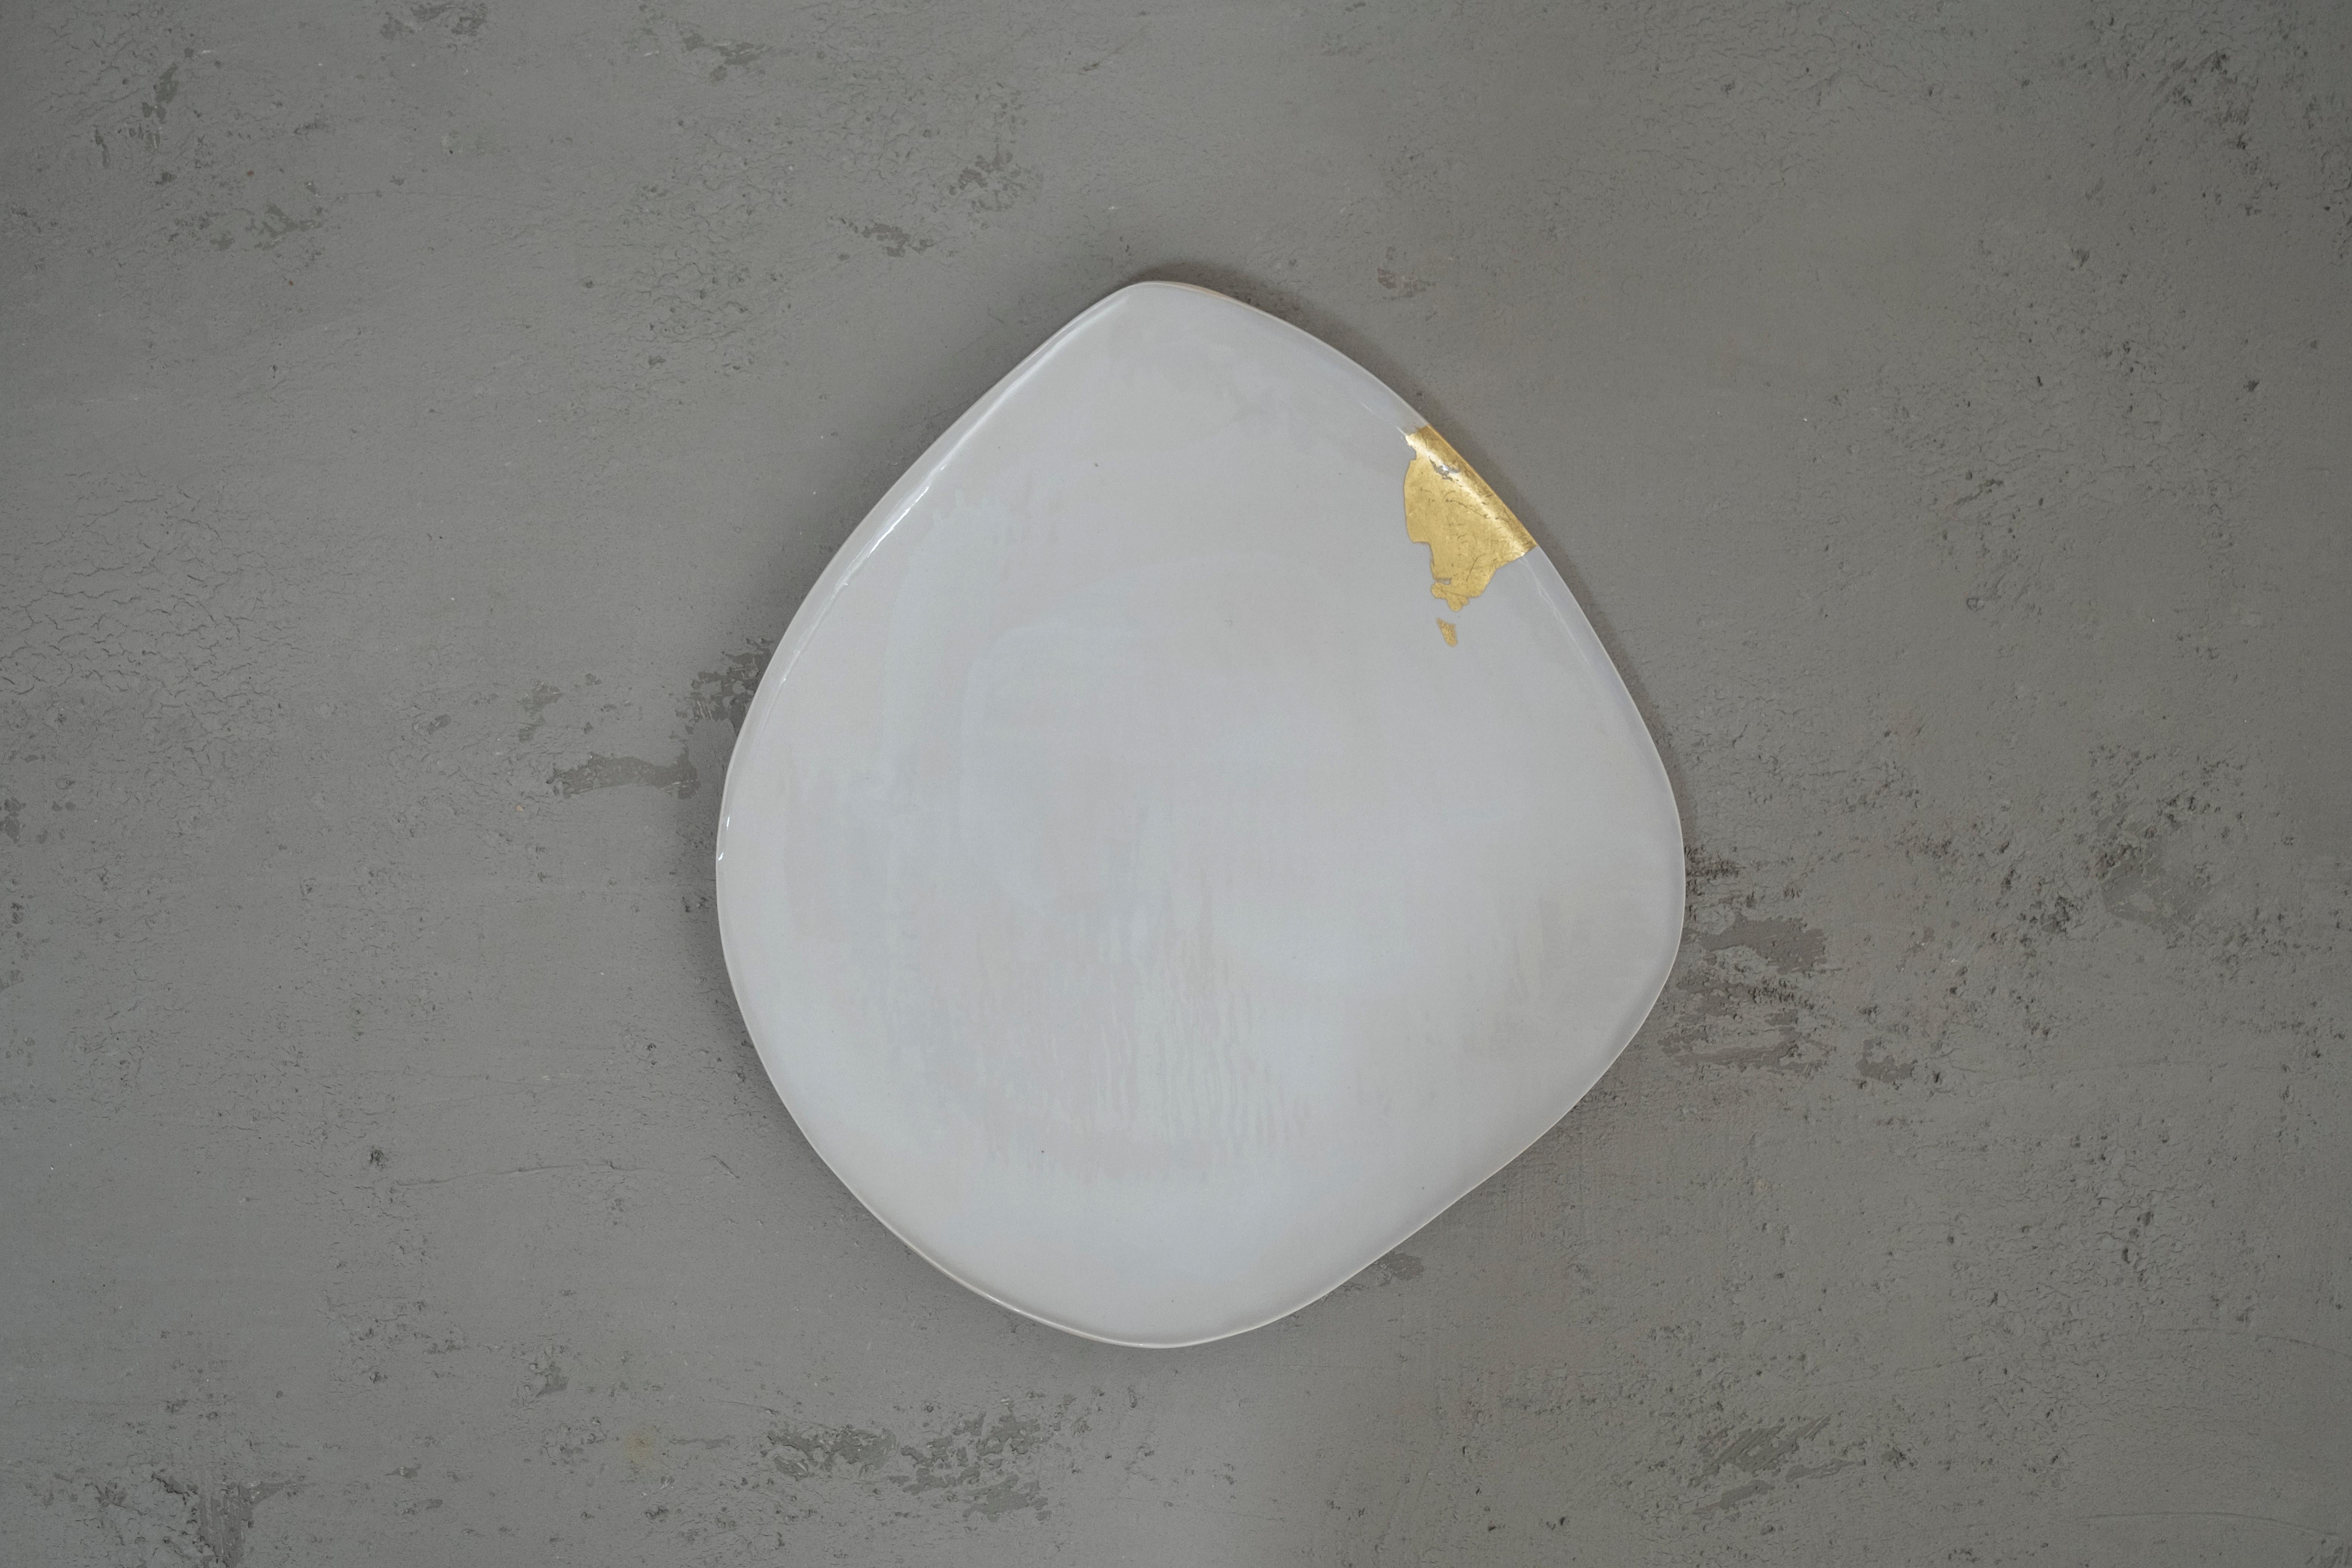 Dune #7 sculpture by Margaux Leycuras
One of a Kind, Signed and numbered
Dimensions: D 41 x H 45.5 cm.
Material: Sandy stoneware platter with white glaze and 22 Carat gold leaf.

The piece is signed, numbered and delivered with a certificate of